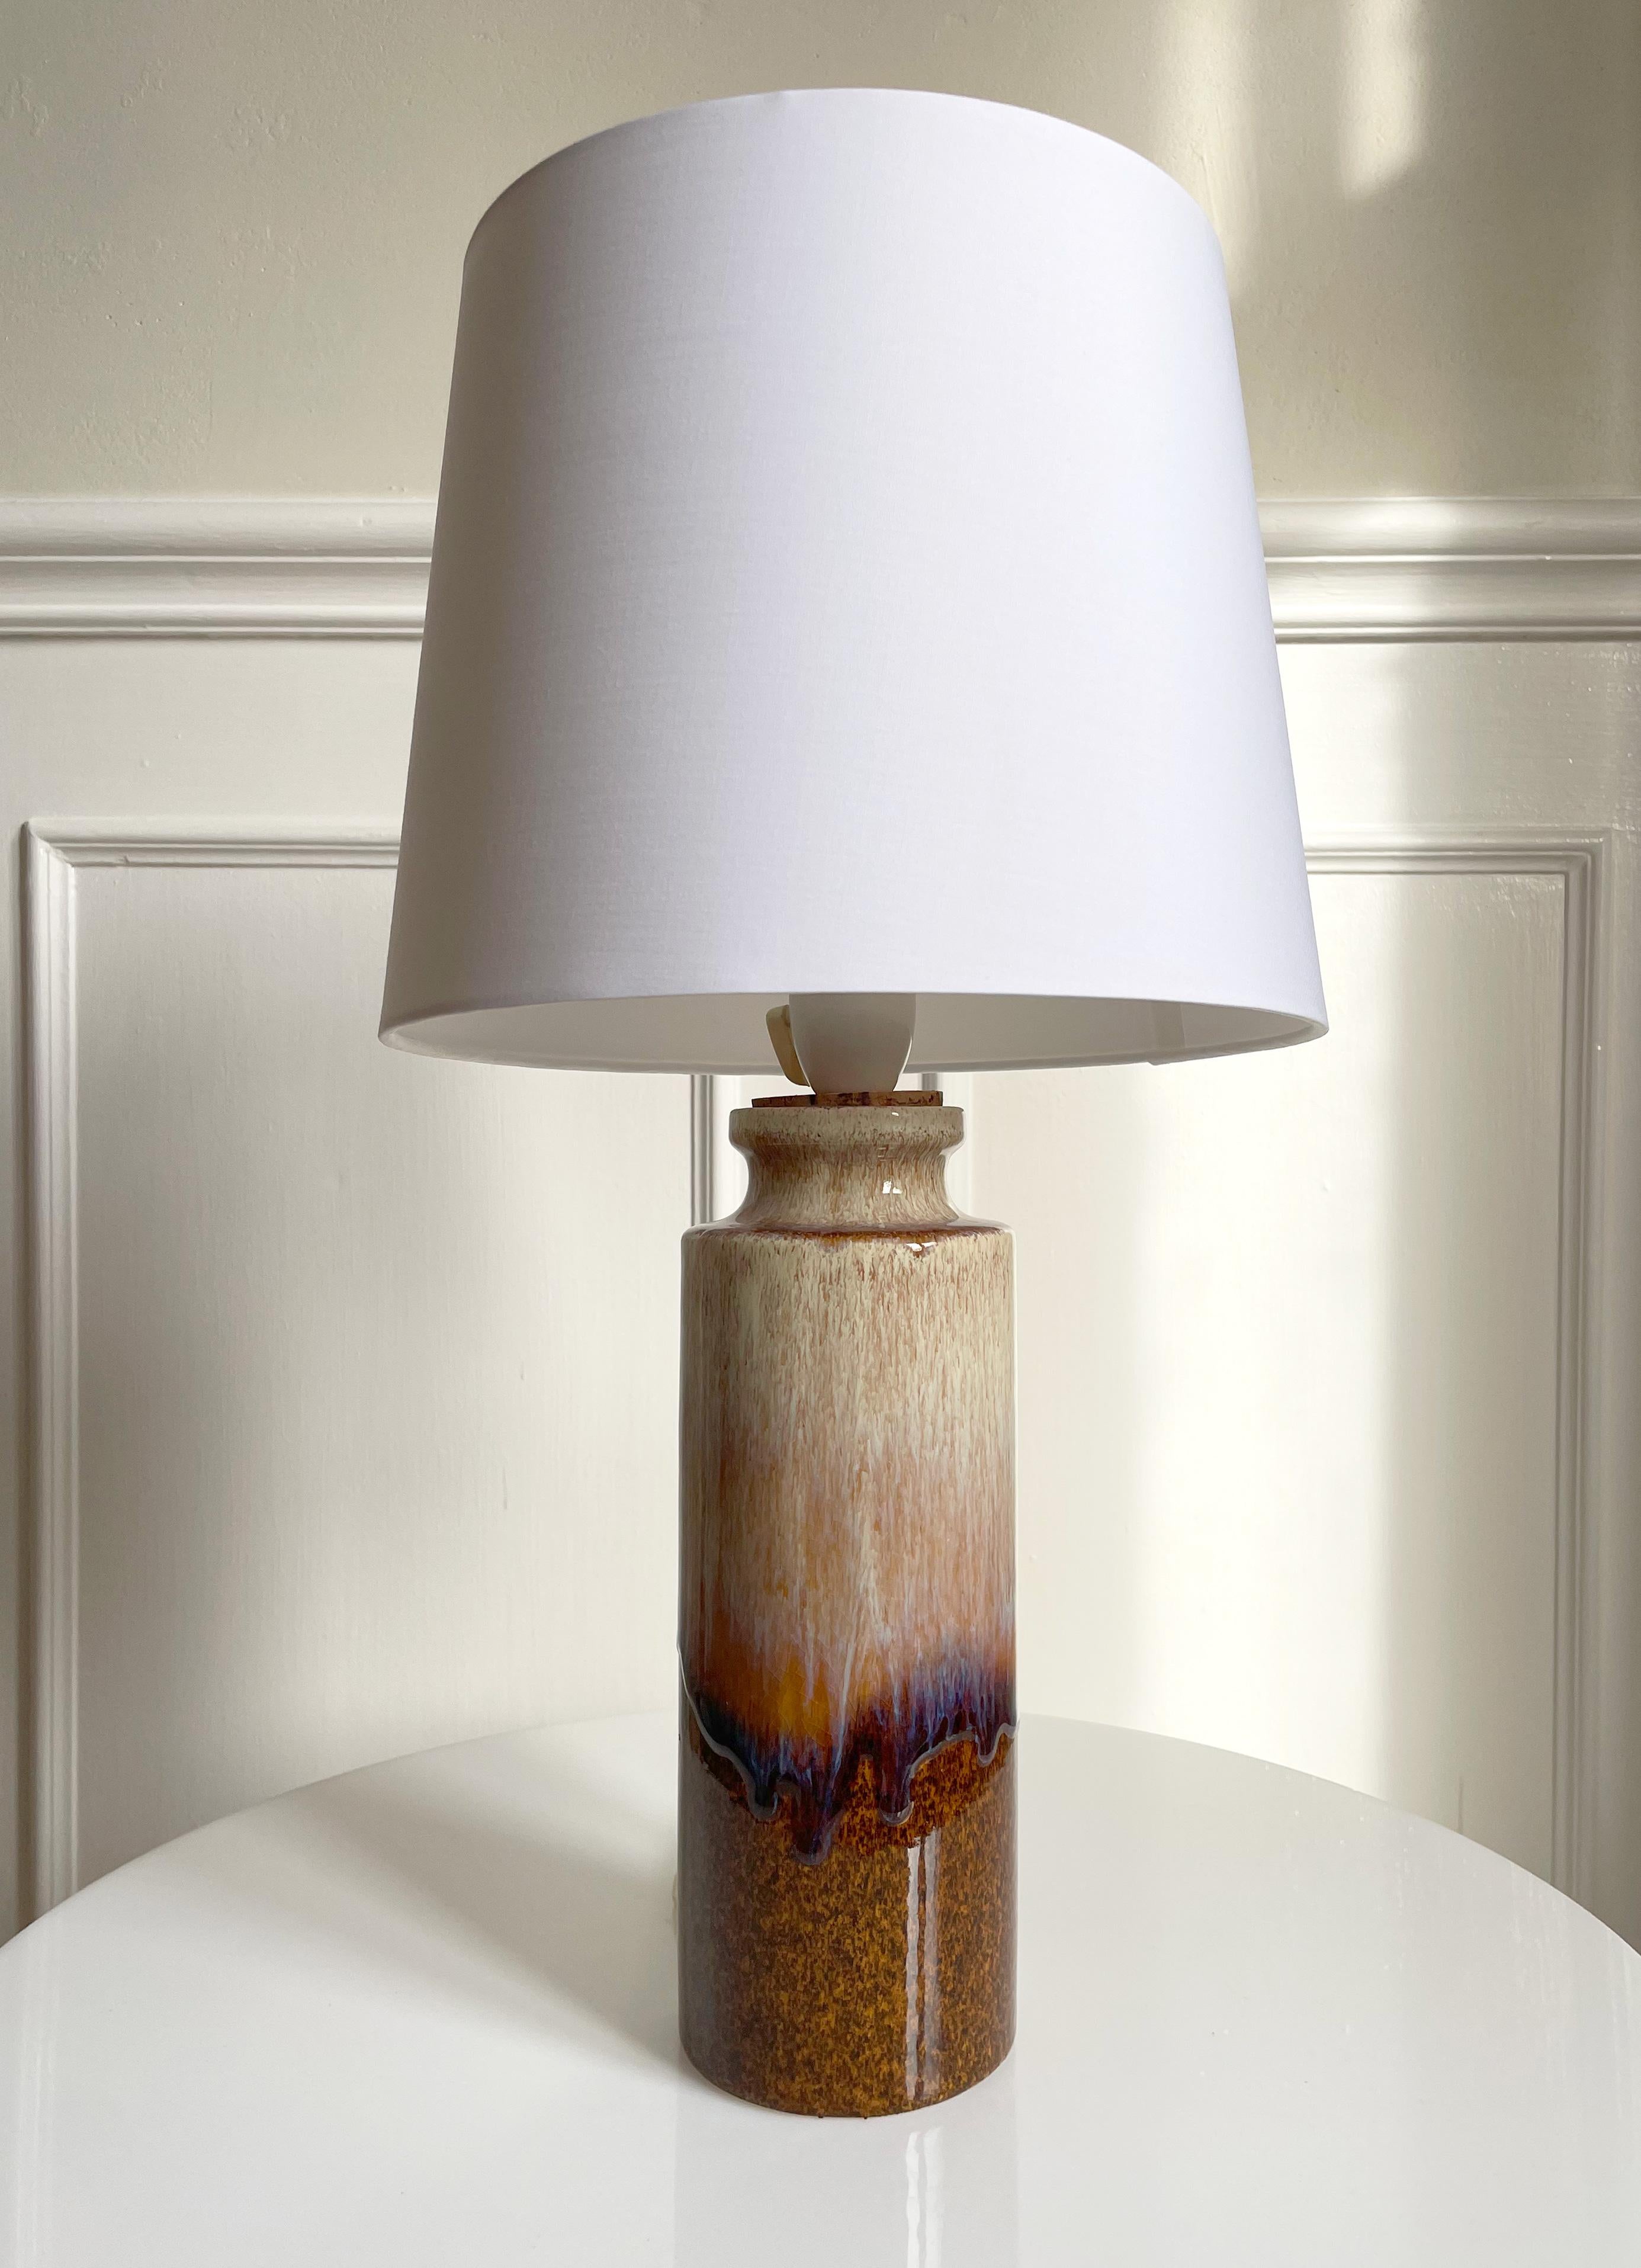 Handmade midcentury modern ceramic table lamp with shiny running earthcolored tone glaze in sand, umber, purple and browns. Height listed is including a shade holder. Shade not included. Beautiful vintage condition. 
Germany, 1960s.